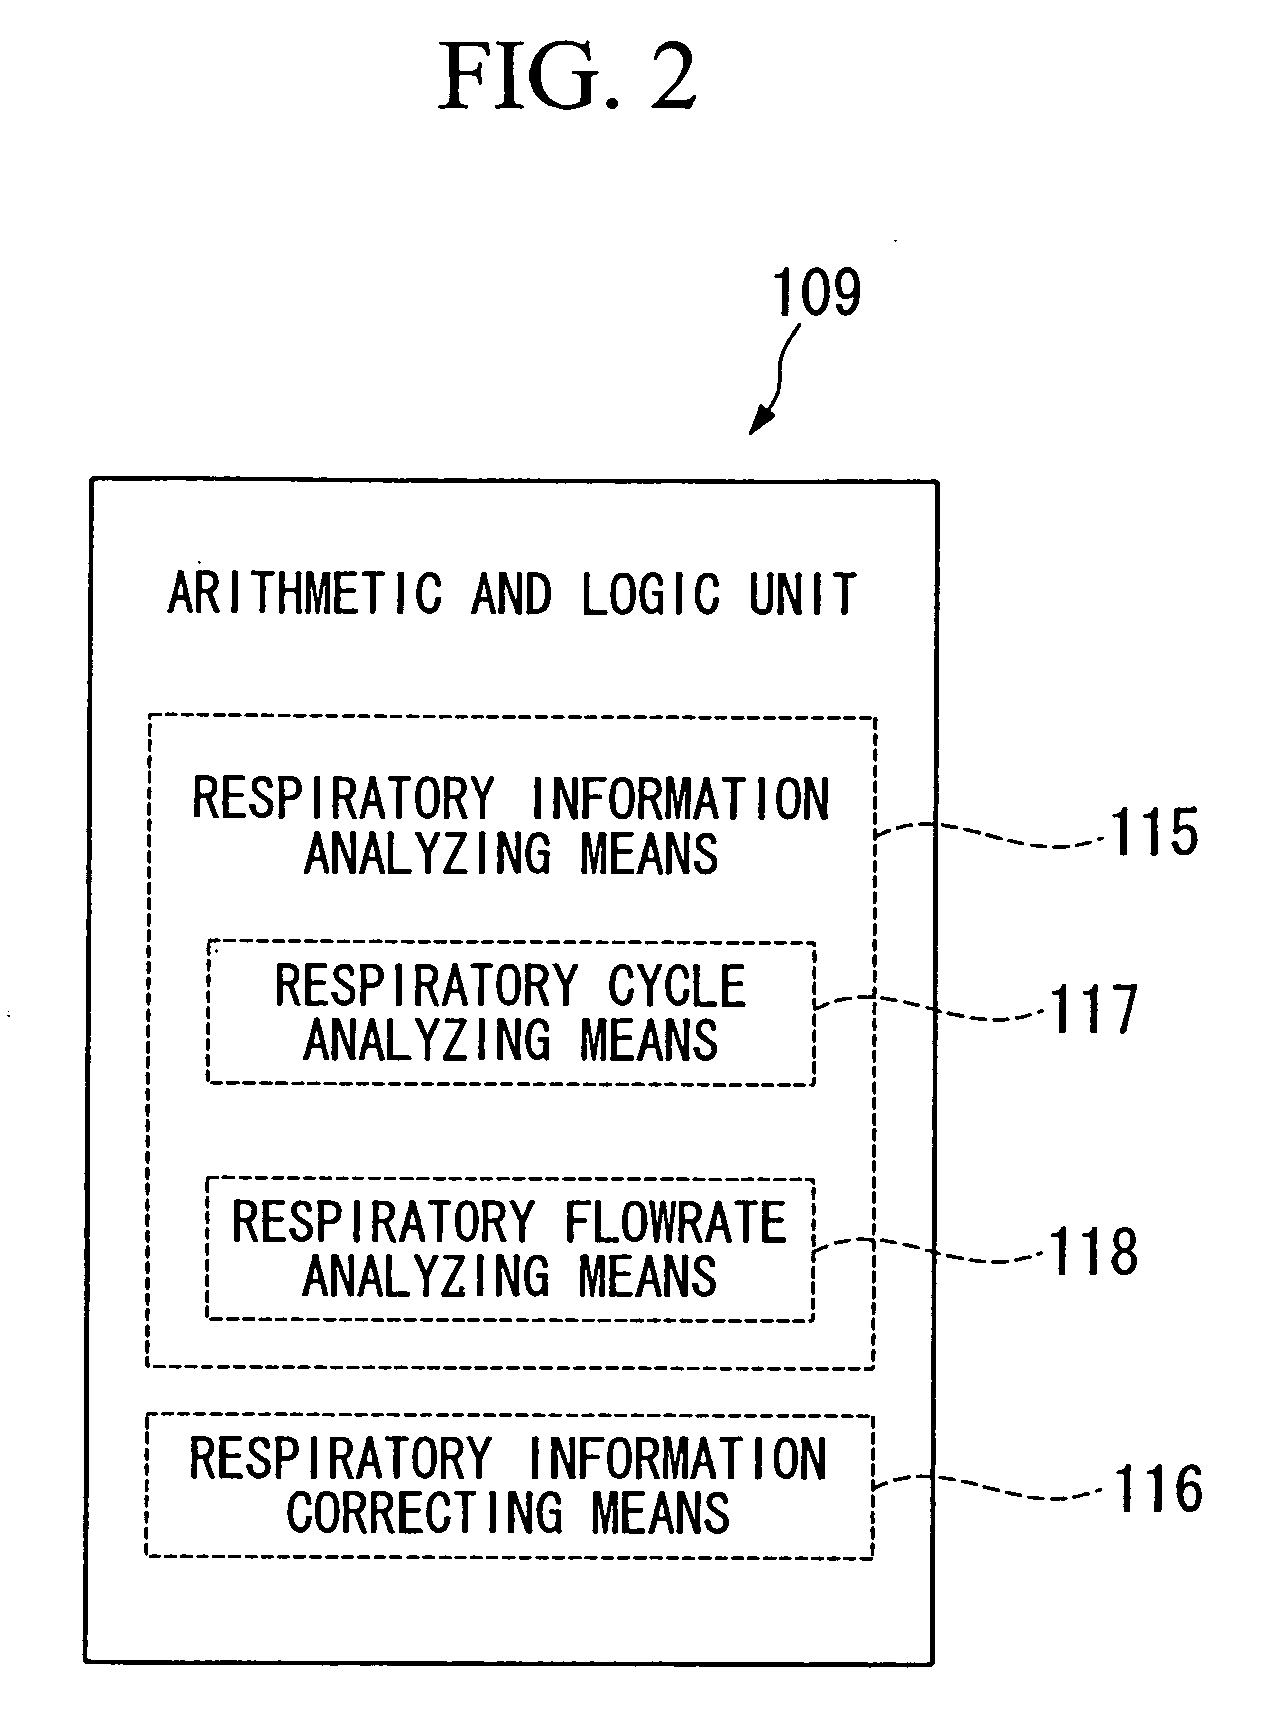 Device for measuring respiration during sleep